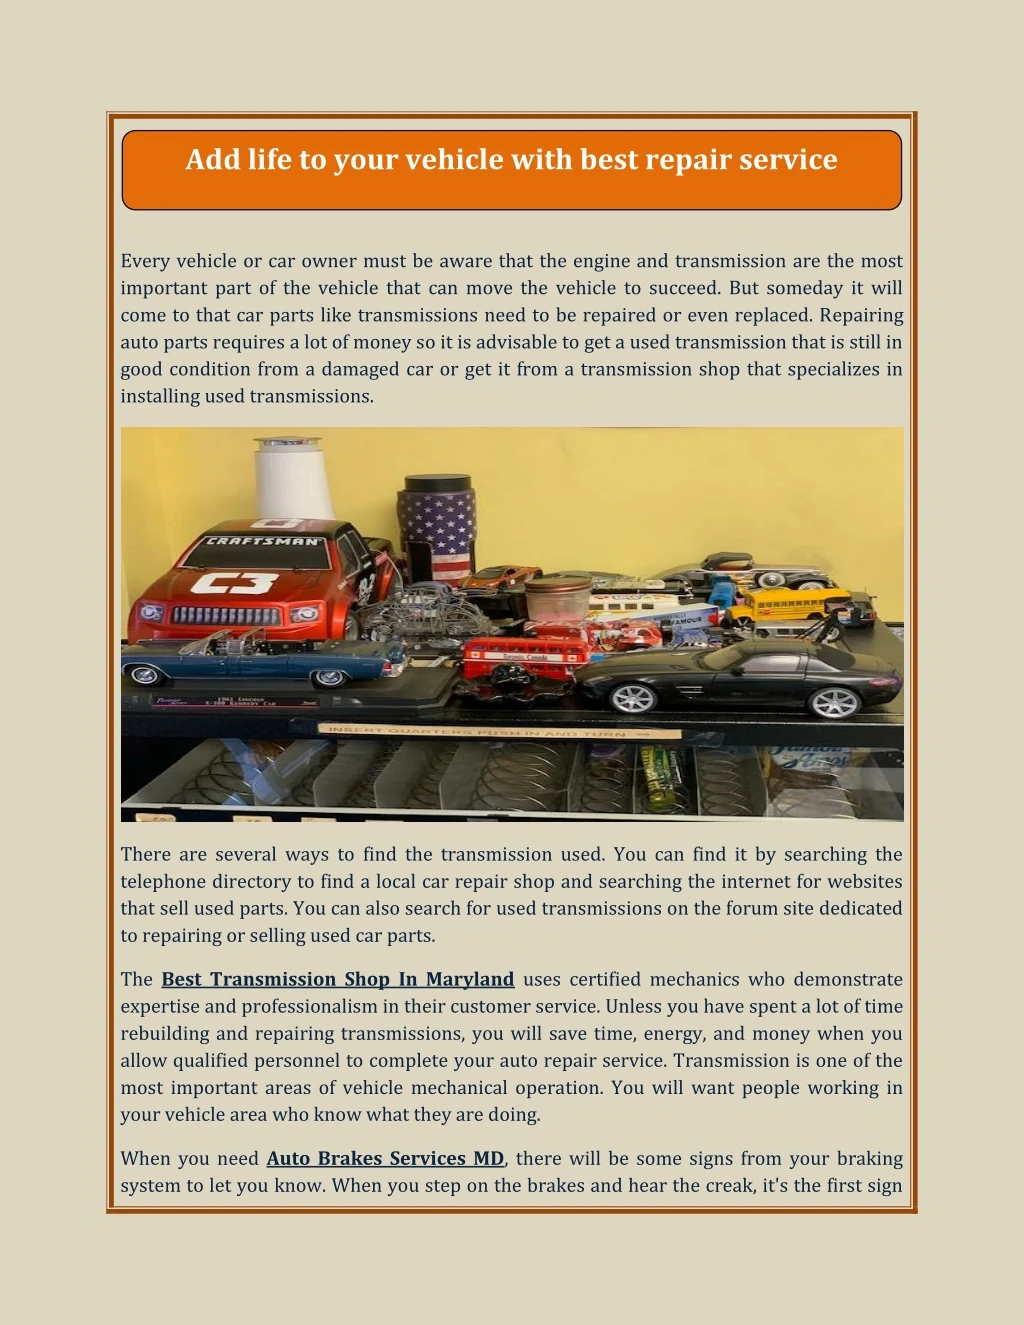 add life to your vehicle with best repair service